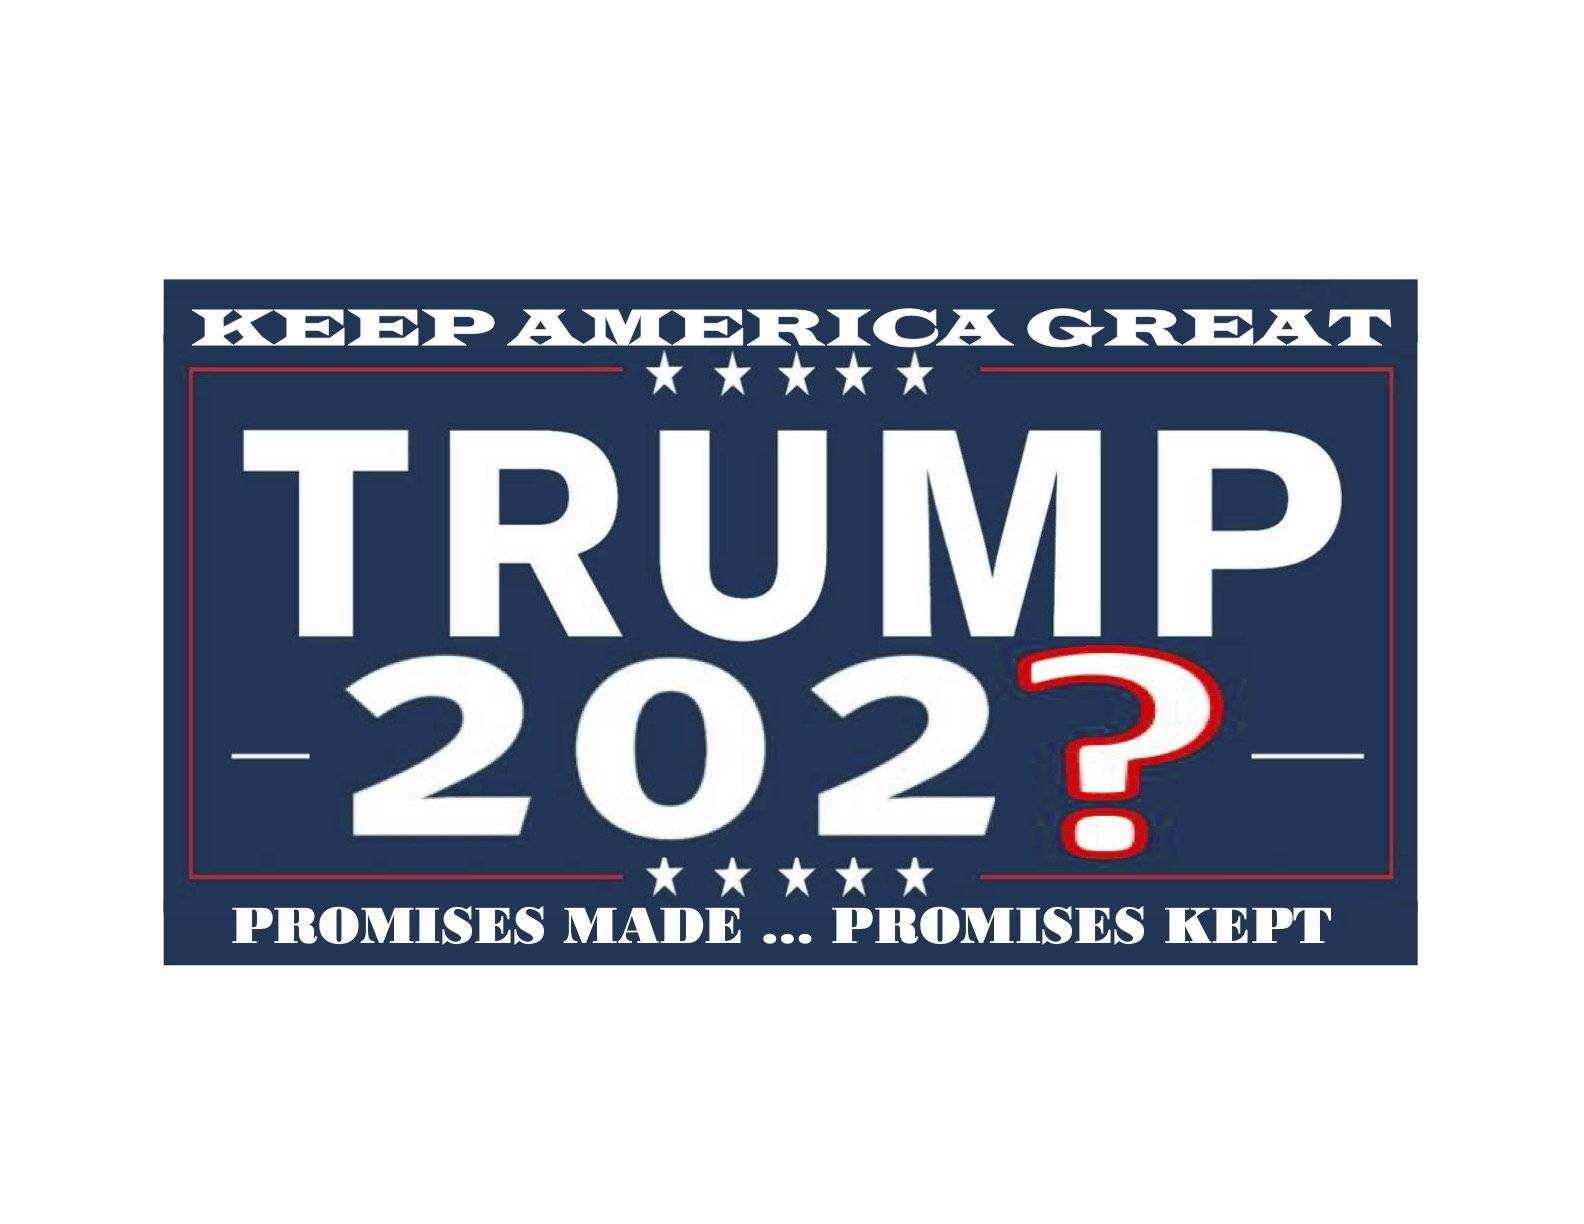 Trump 202? Keep America Great Promises Made Promises Kept Flag - Made in USA.